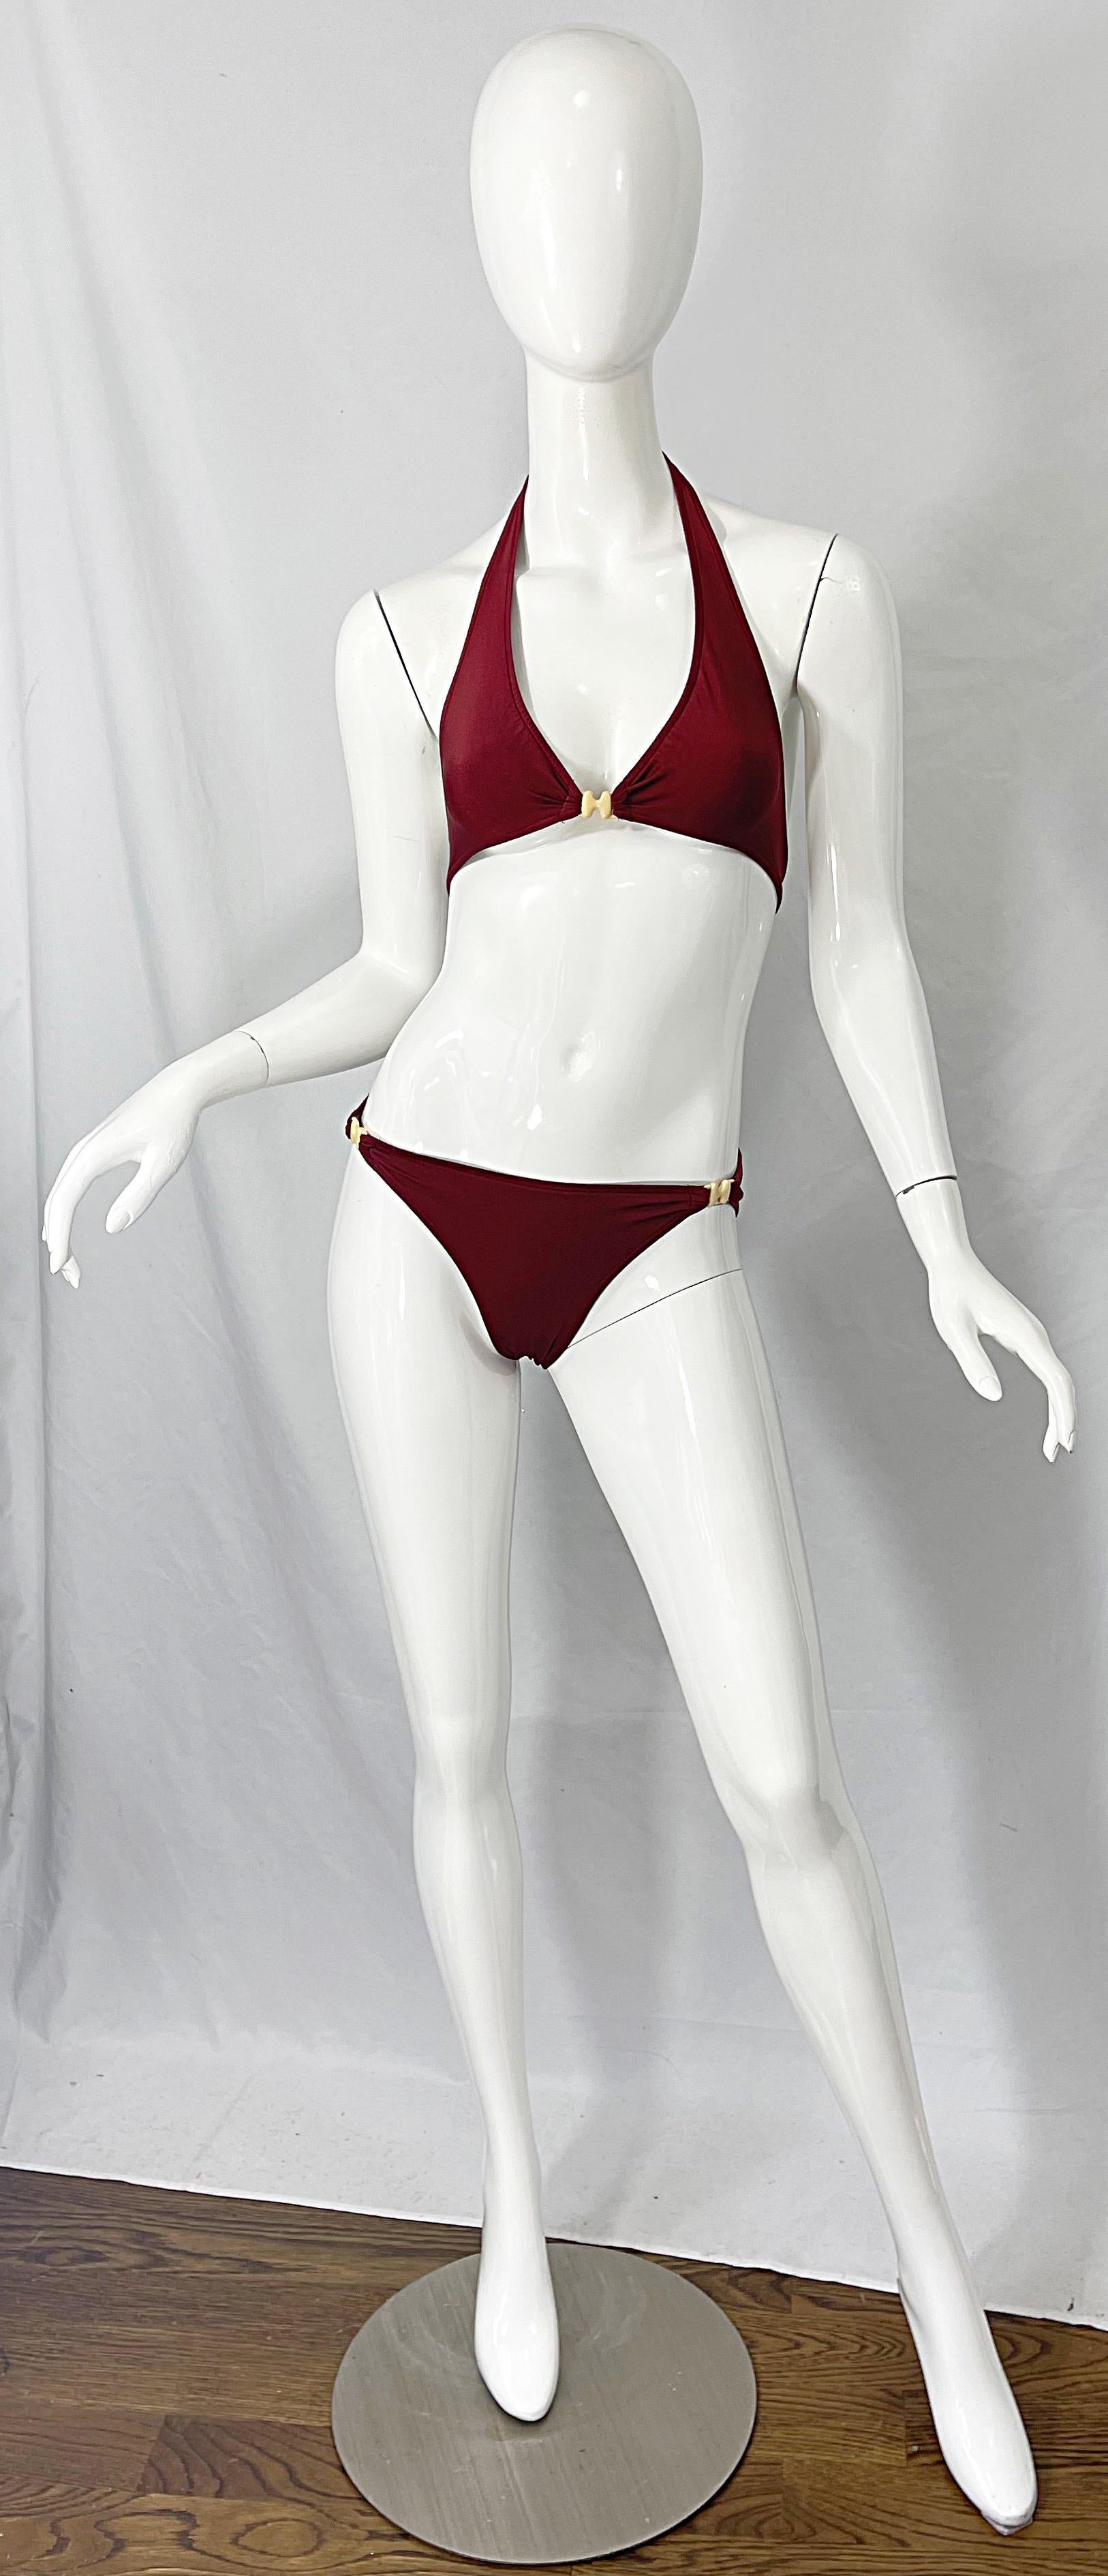 Another 1970s HALSTON brown / rust two piece bikini swimsuit ! This is one of five swimsuits from a halstonette model herself. Ivory colored lucite buckles in the signature H shape. Ties in the back. A truly flattering piece that will only continue